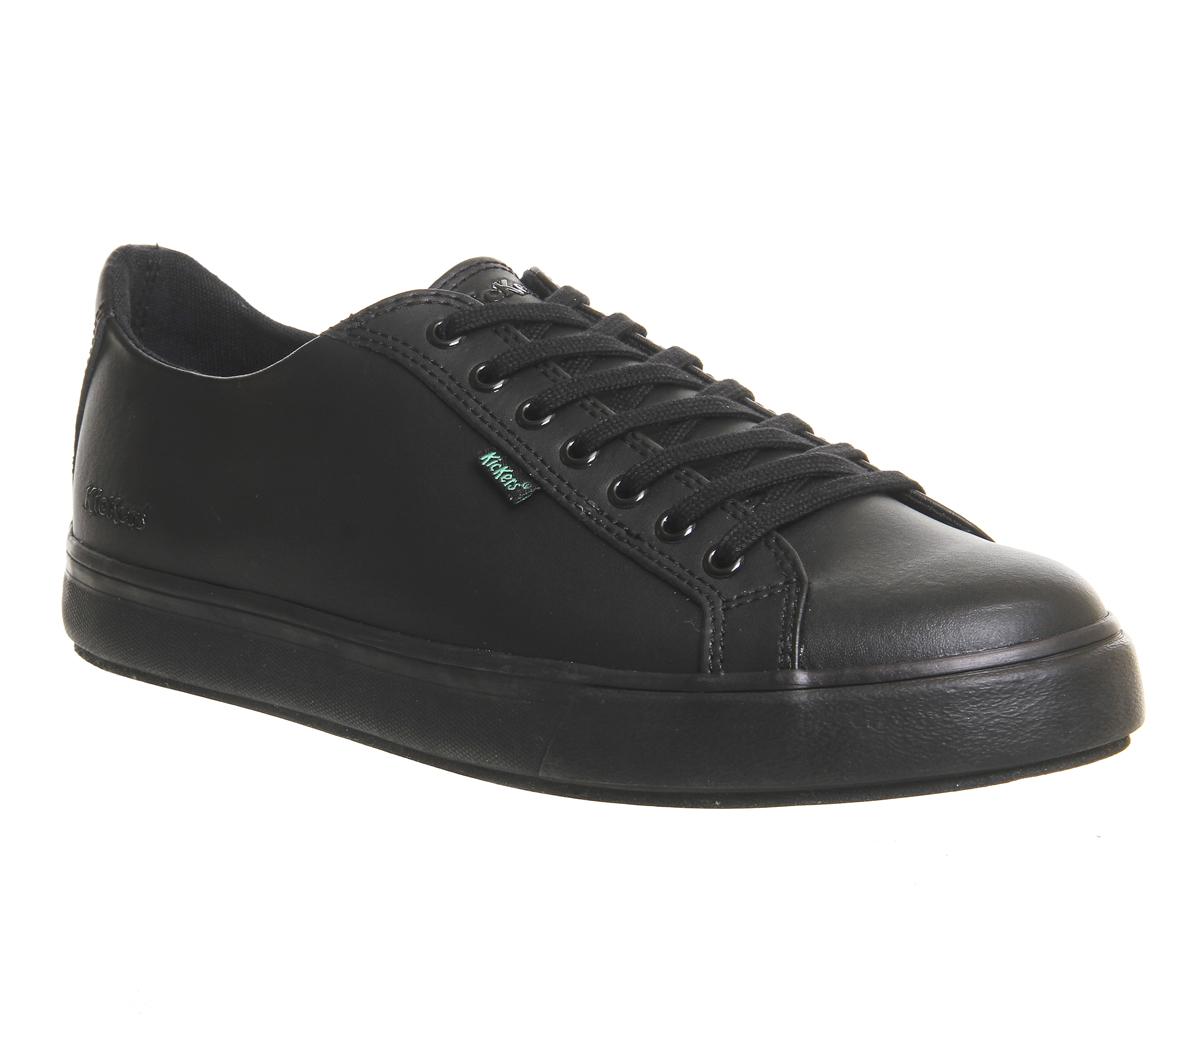 Kickers Tovni Lacer Sneakers Black 